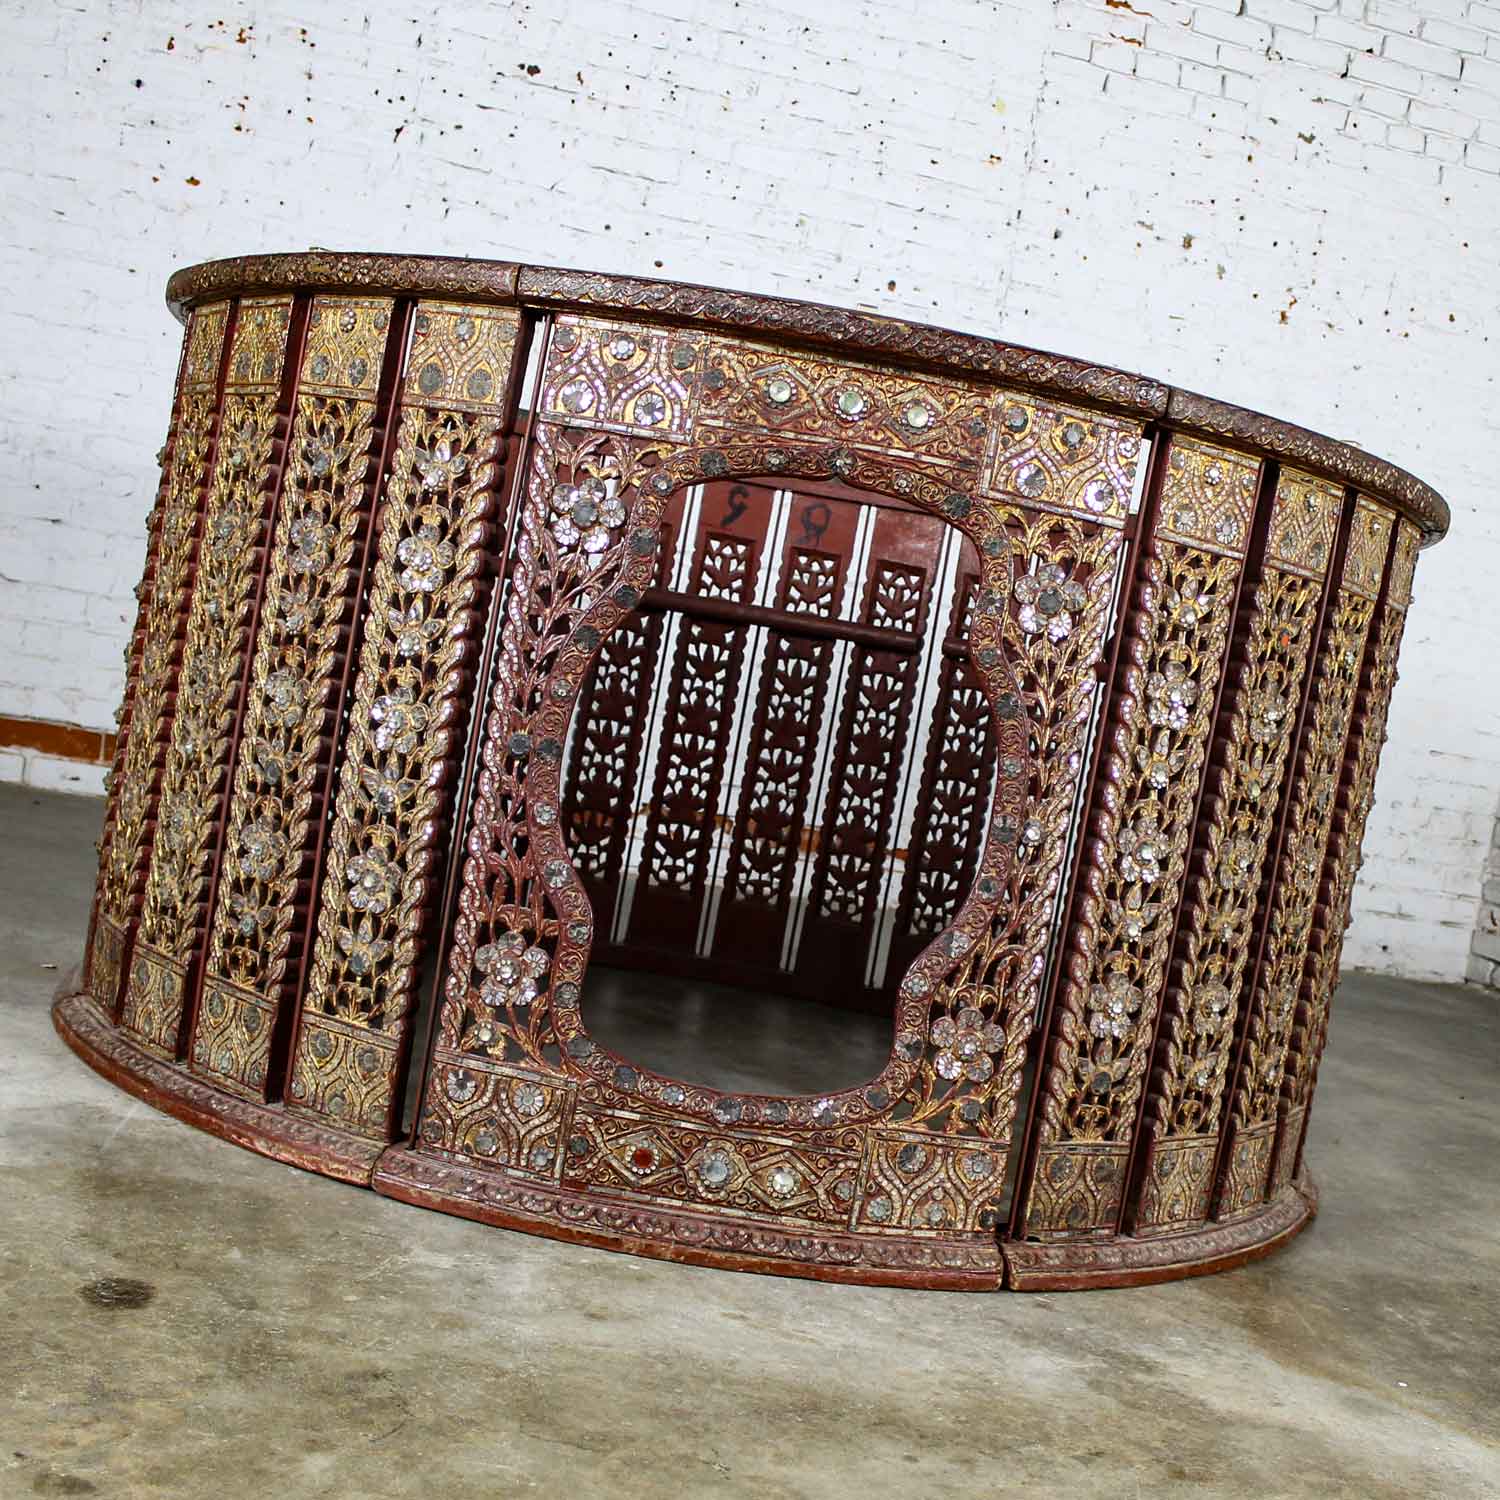 Antique Burmese Orchestra Hsian Wain Drum/Percussion Circle Carved Panel Table with Rectangular Glass Top & 15 Myanmar Drums